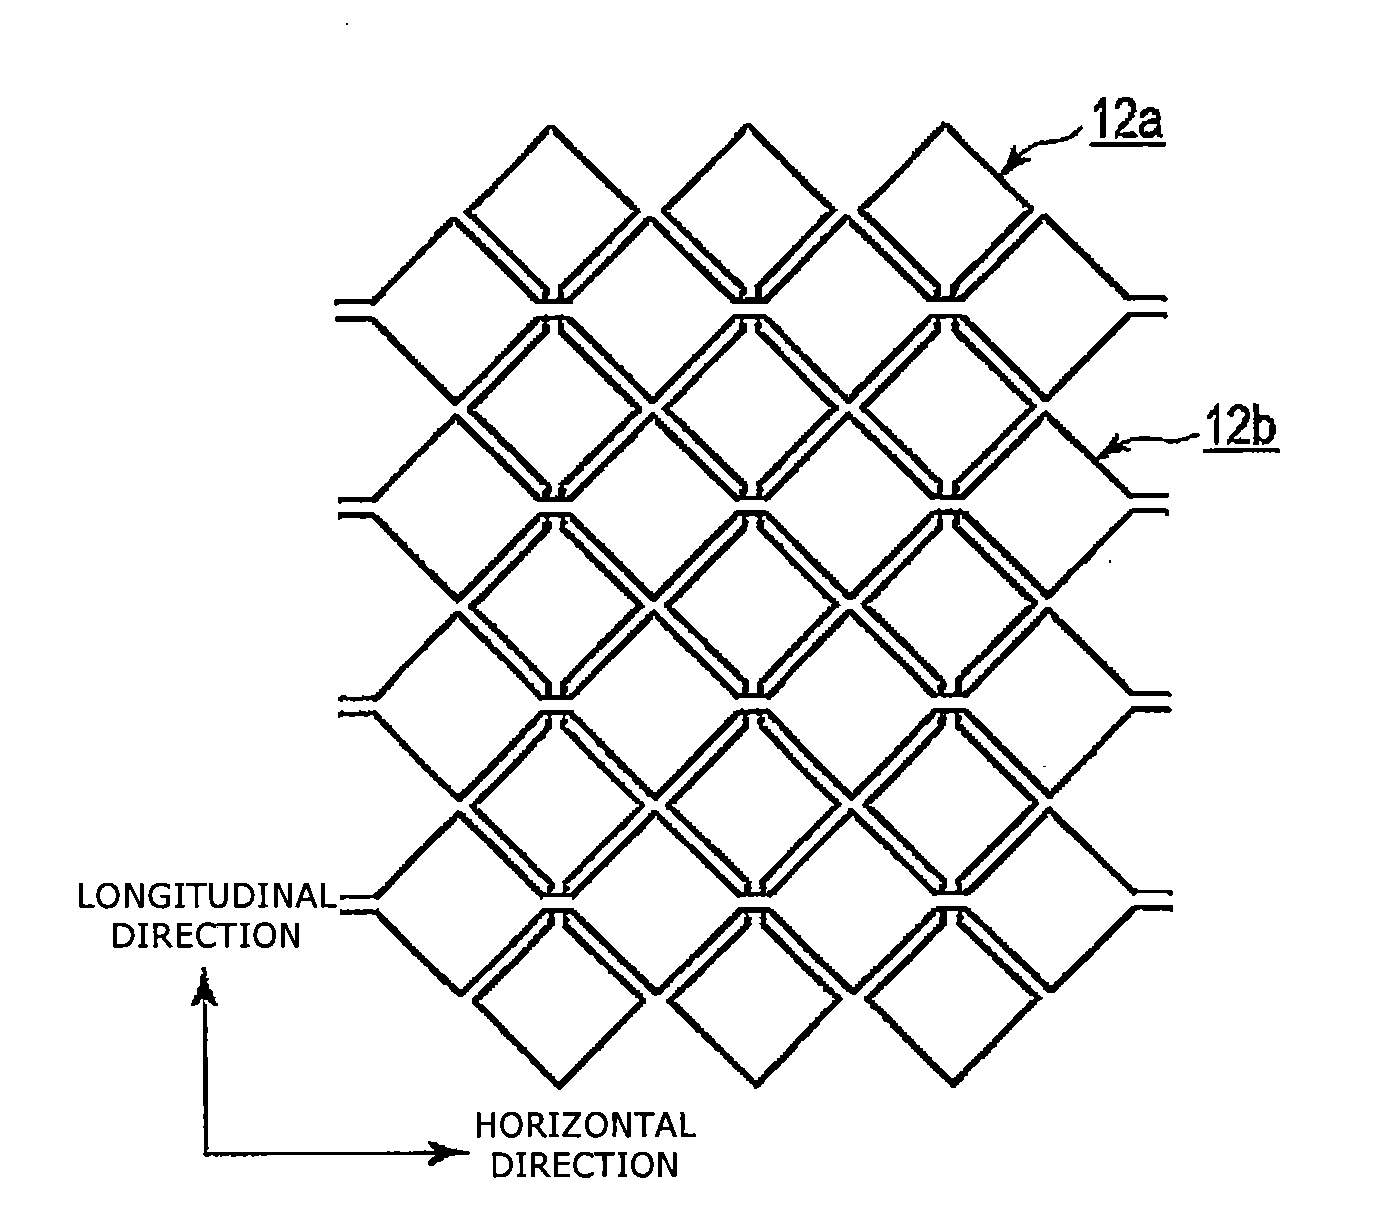 Liquid crystal display device and color filter substrate